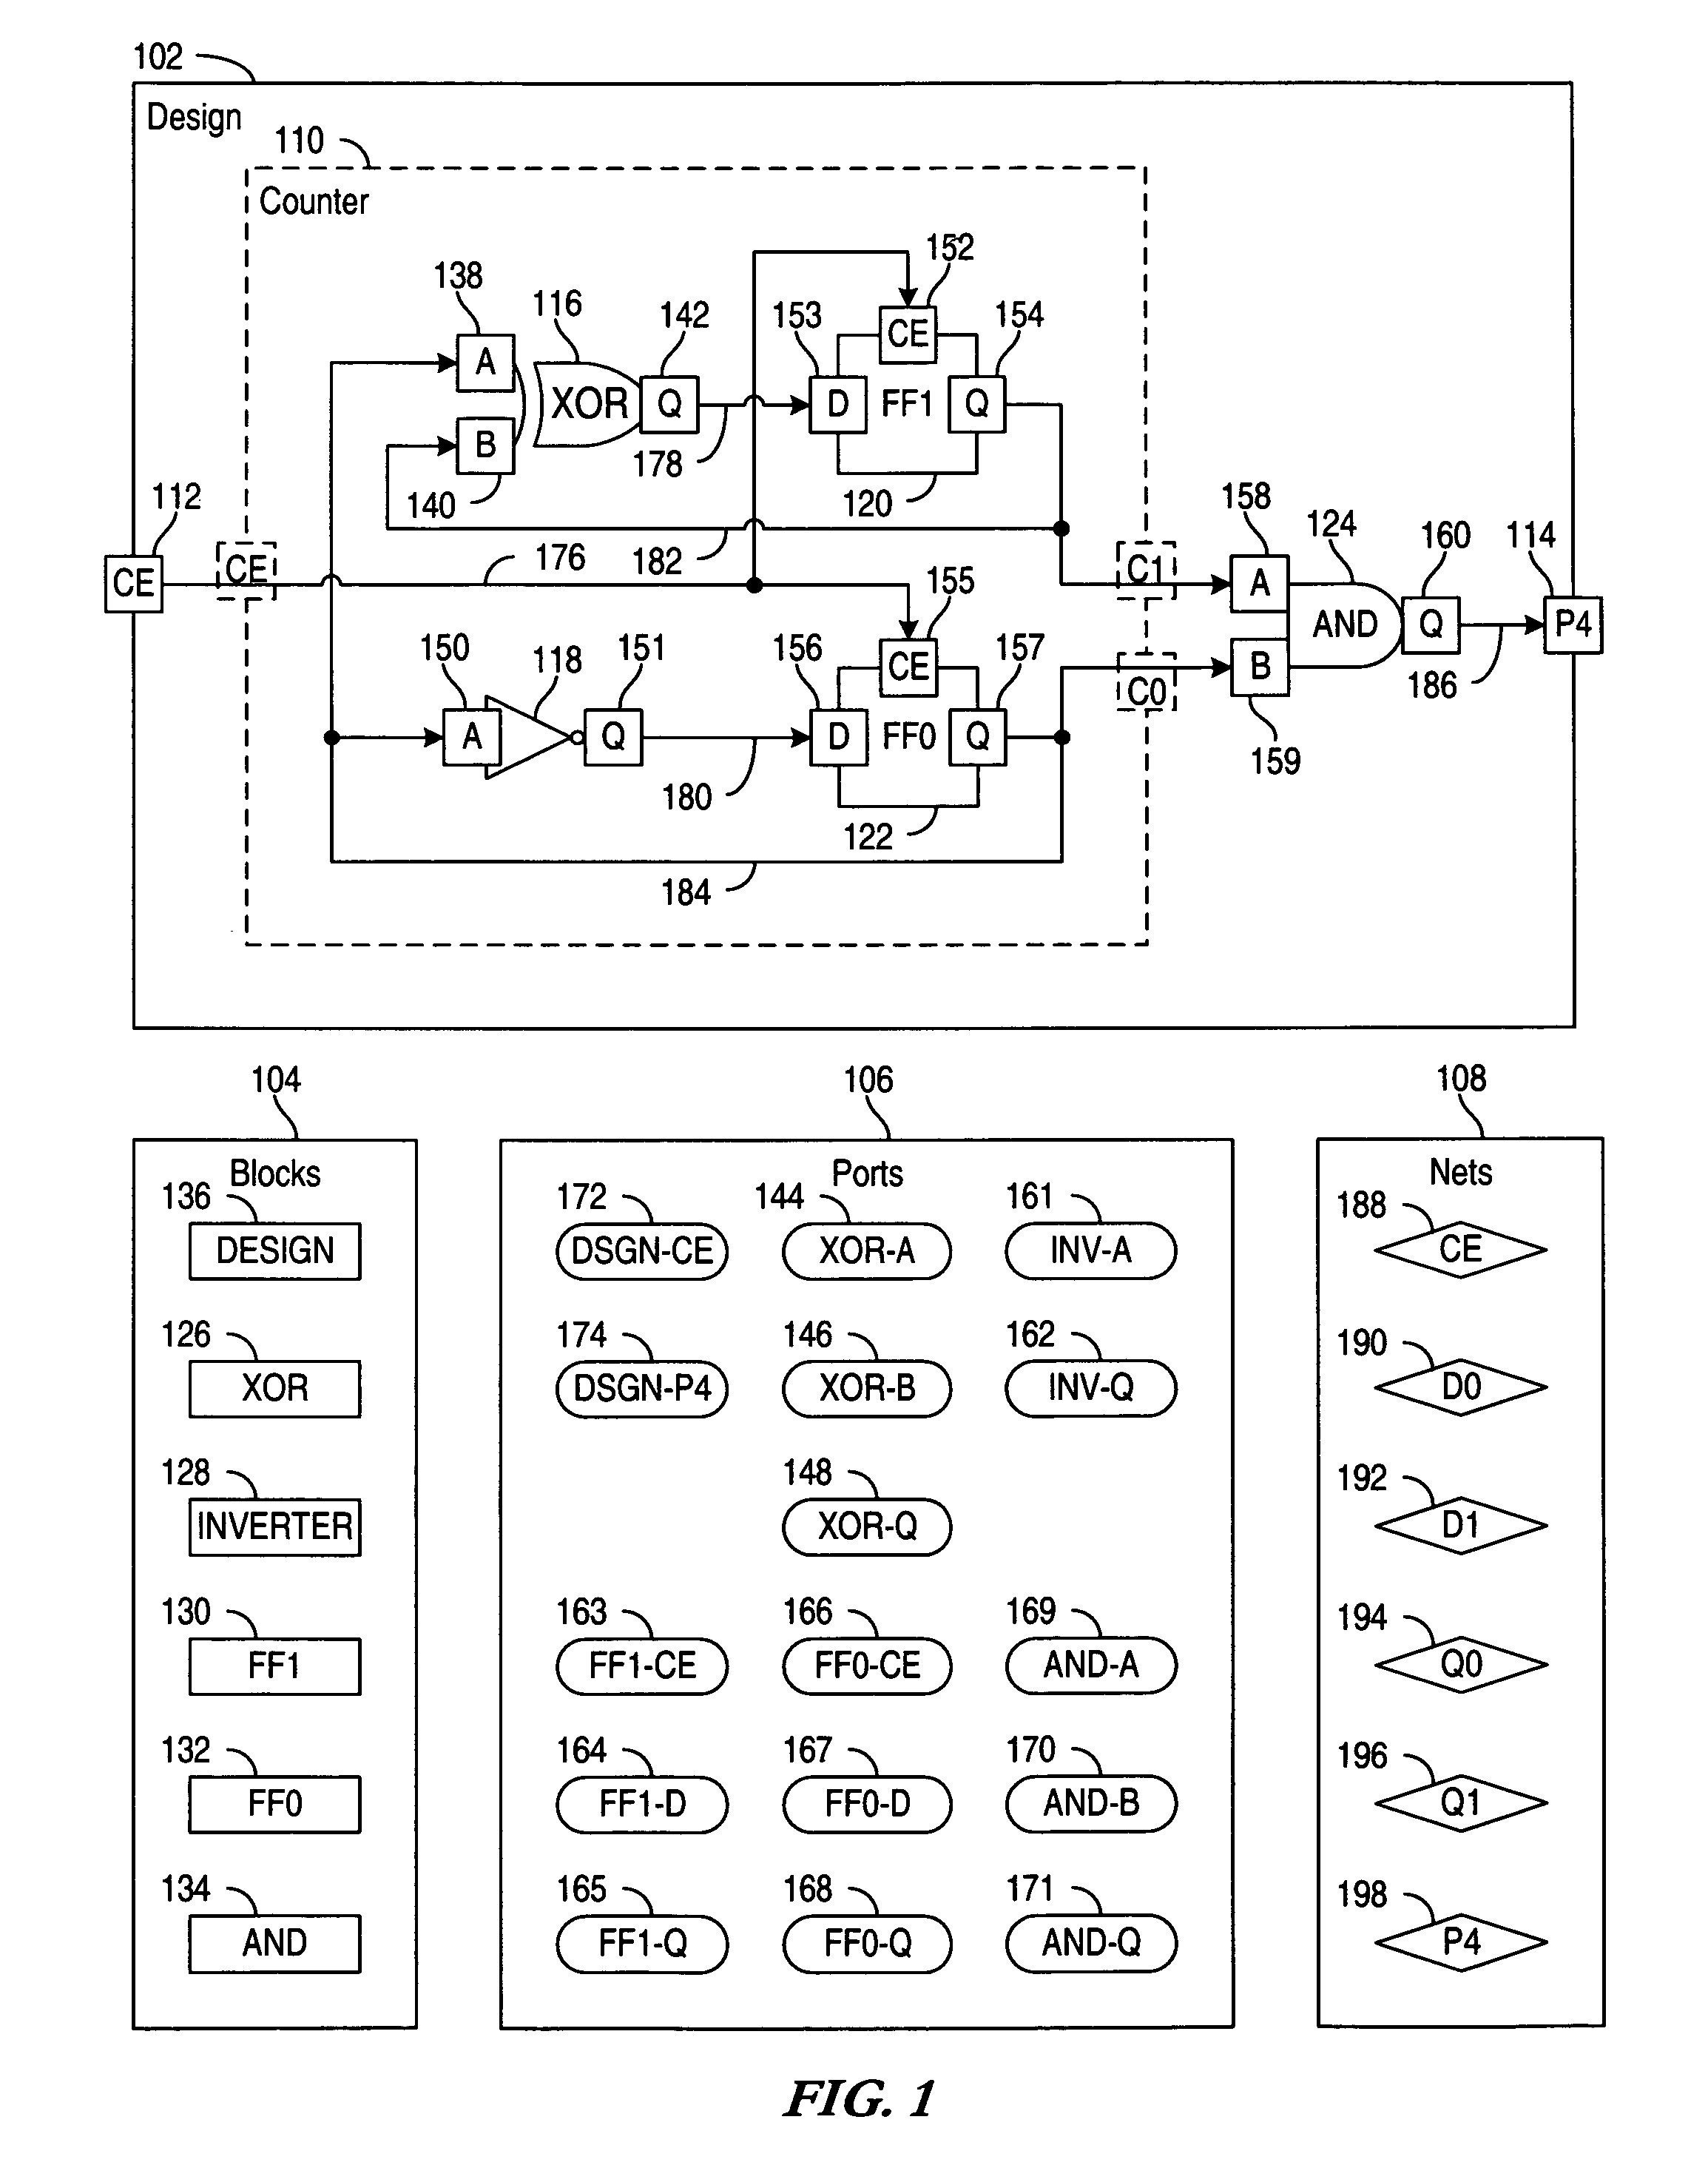 Transformation of graphs representing an electronic design in a high modeling system